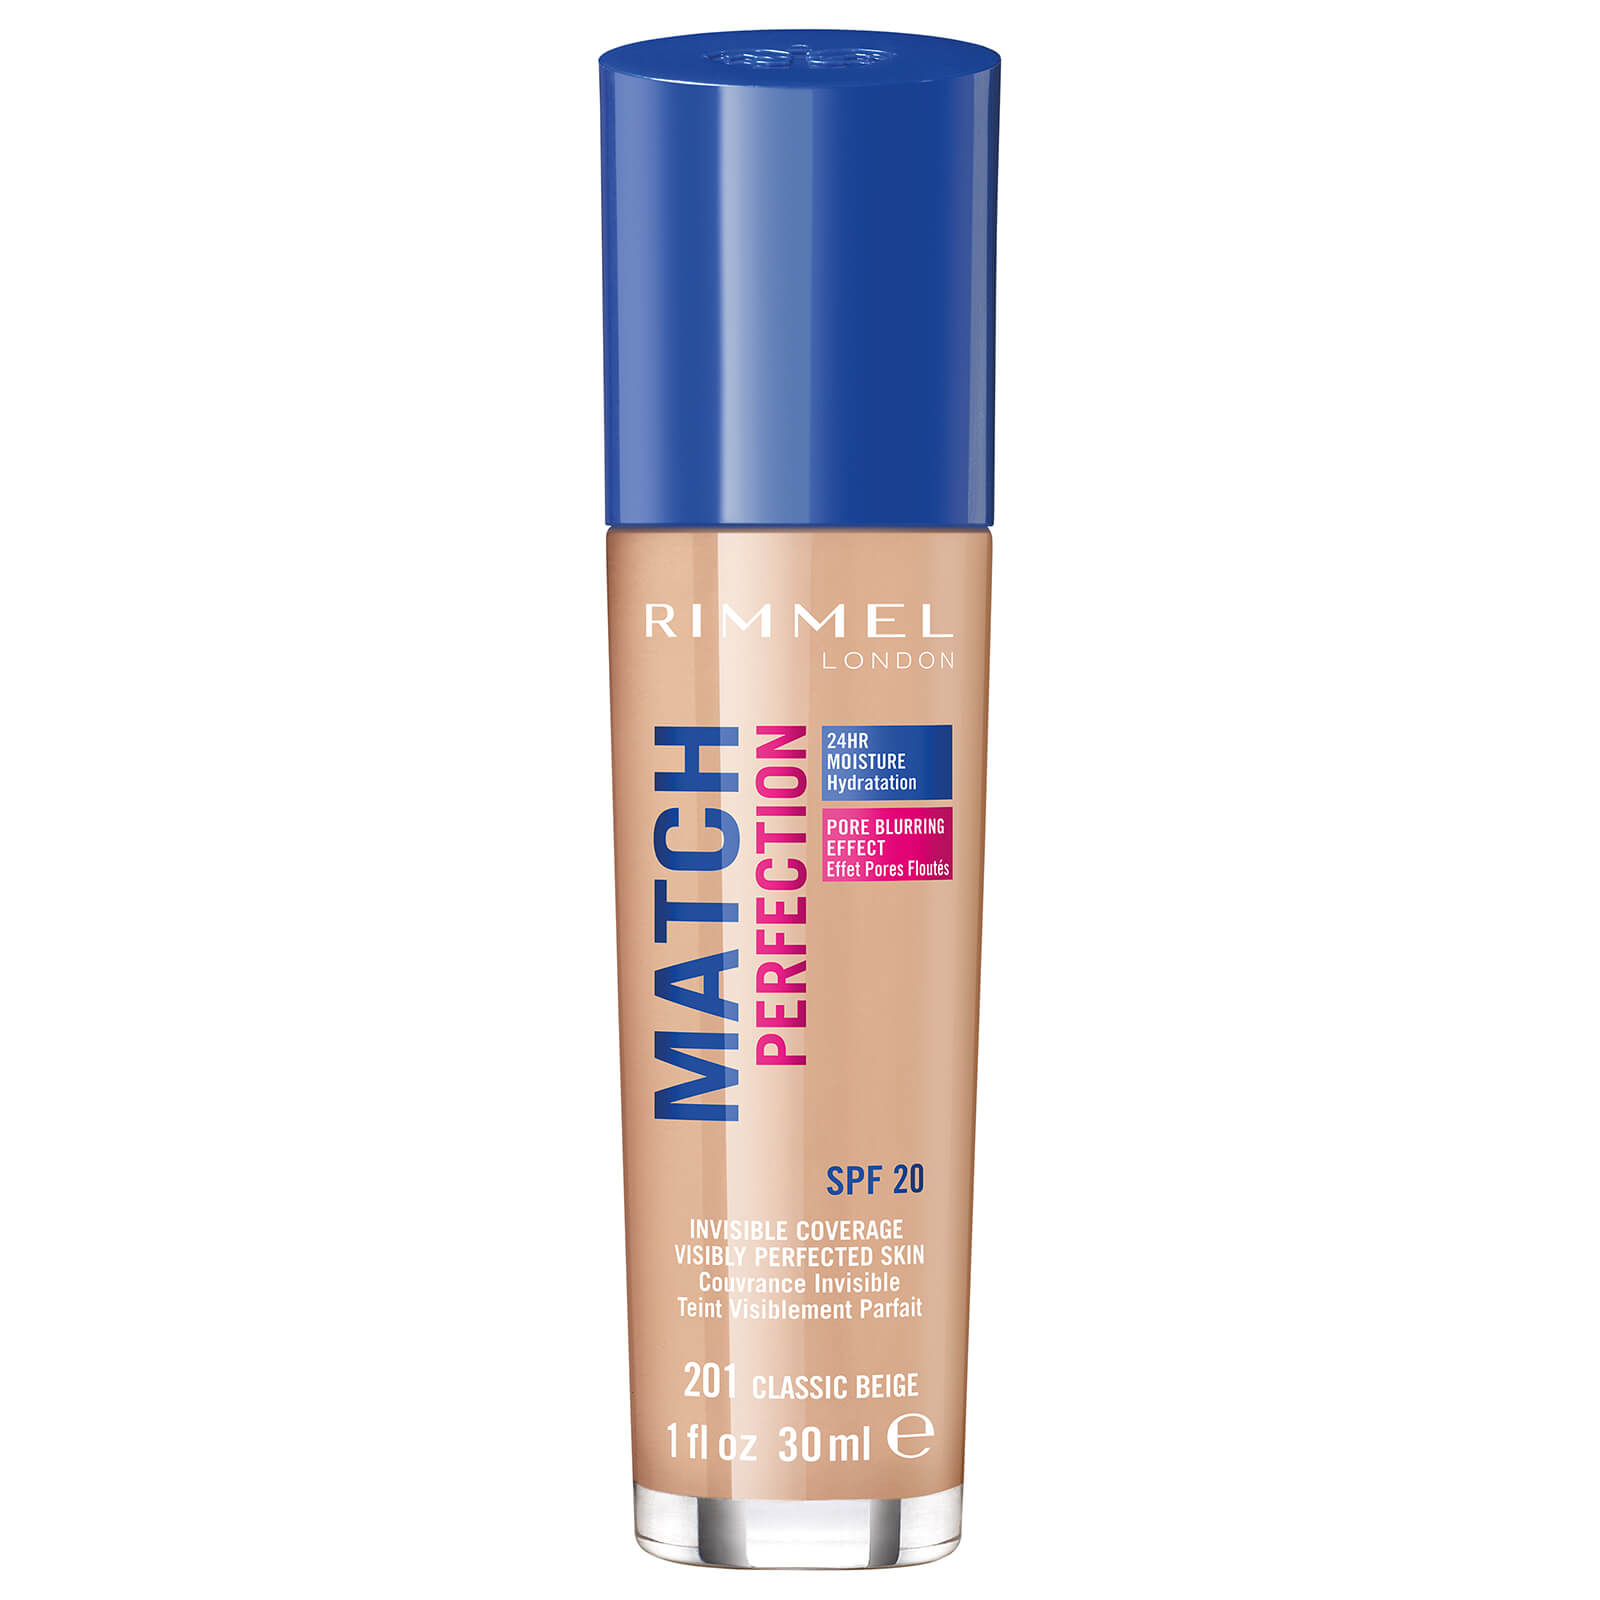 Rimmel Match Perfection Foundation 30ml (Various Shades) - Classic Beige